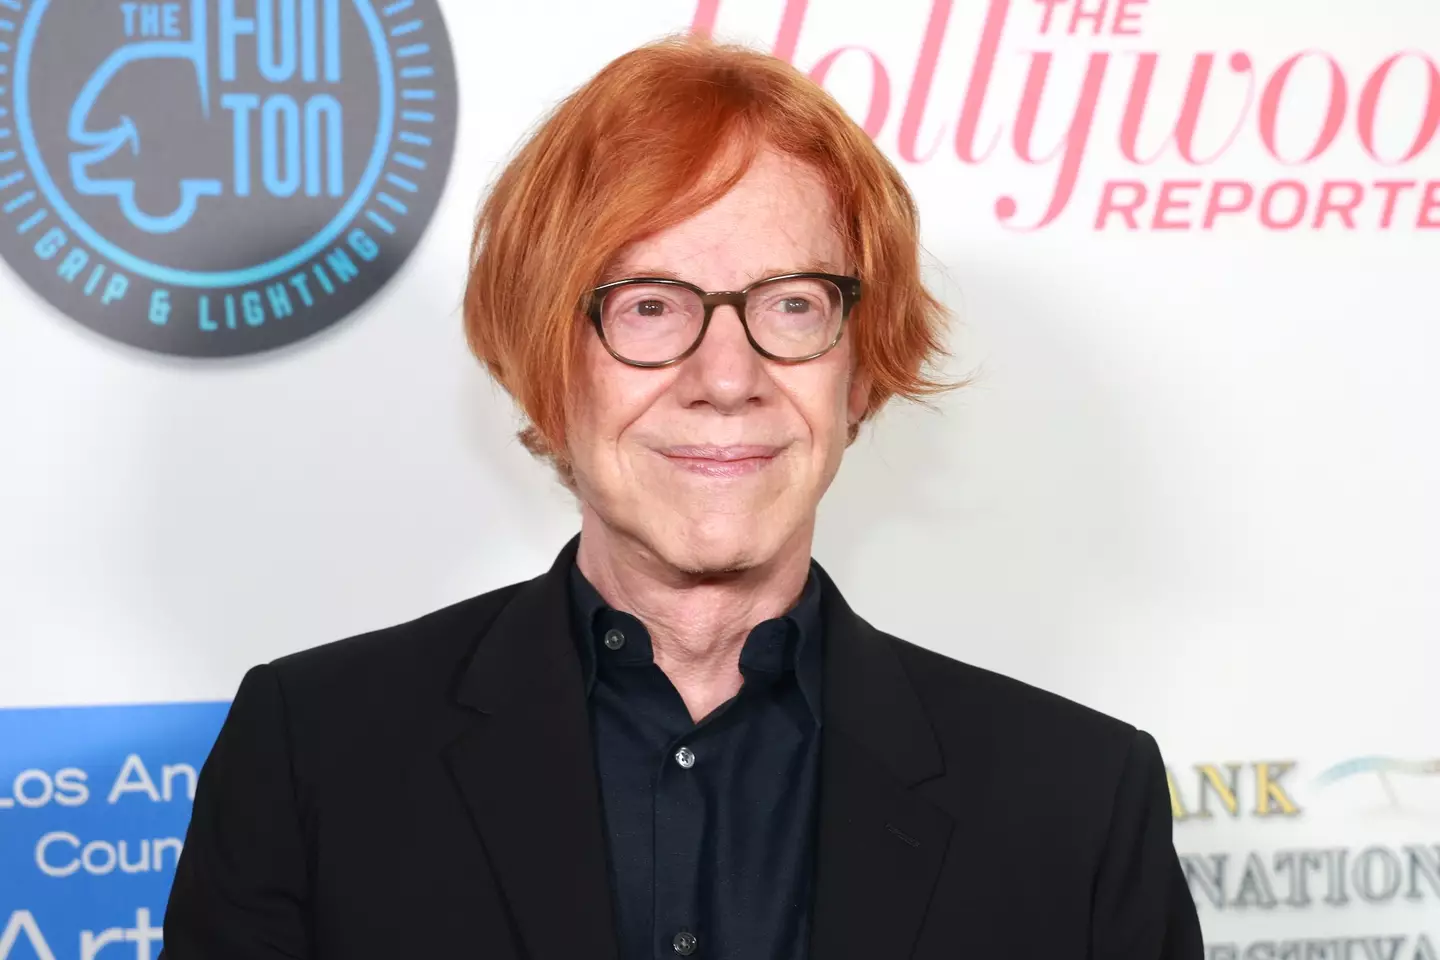 The new plaintiff has alleged that she and Elfman met at a party in April of 1997 when she was a 21-year-old student at the New York Academy and Elfman was 47.